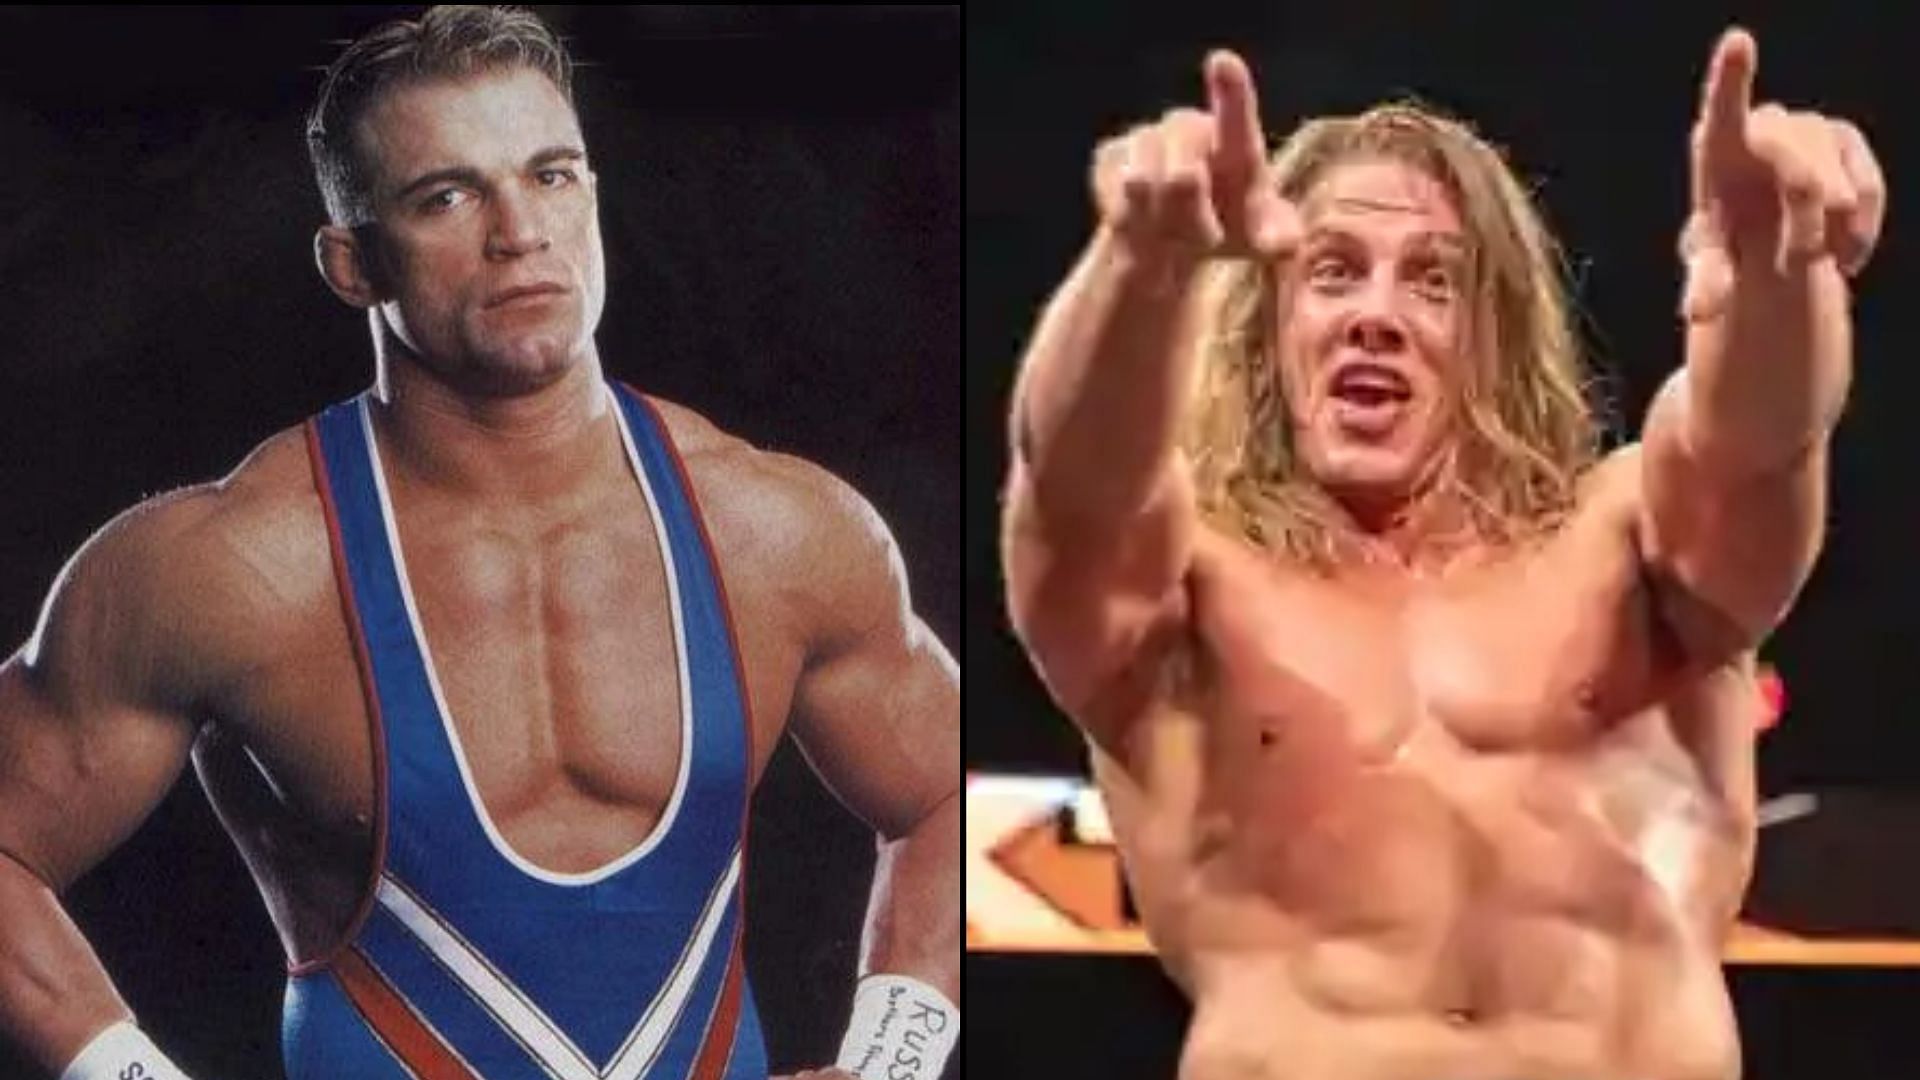 Charlie Haas (left) is a former WWE Superstar and Matt Riddle (right)